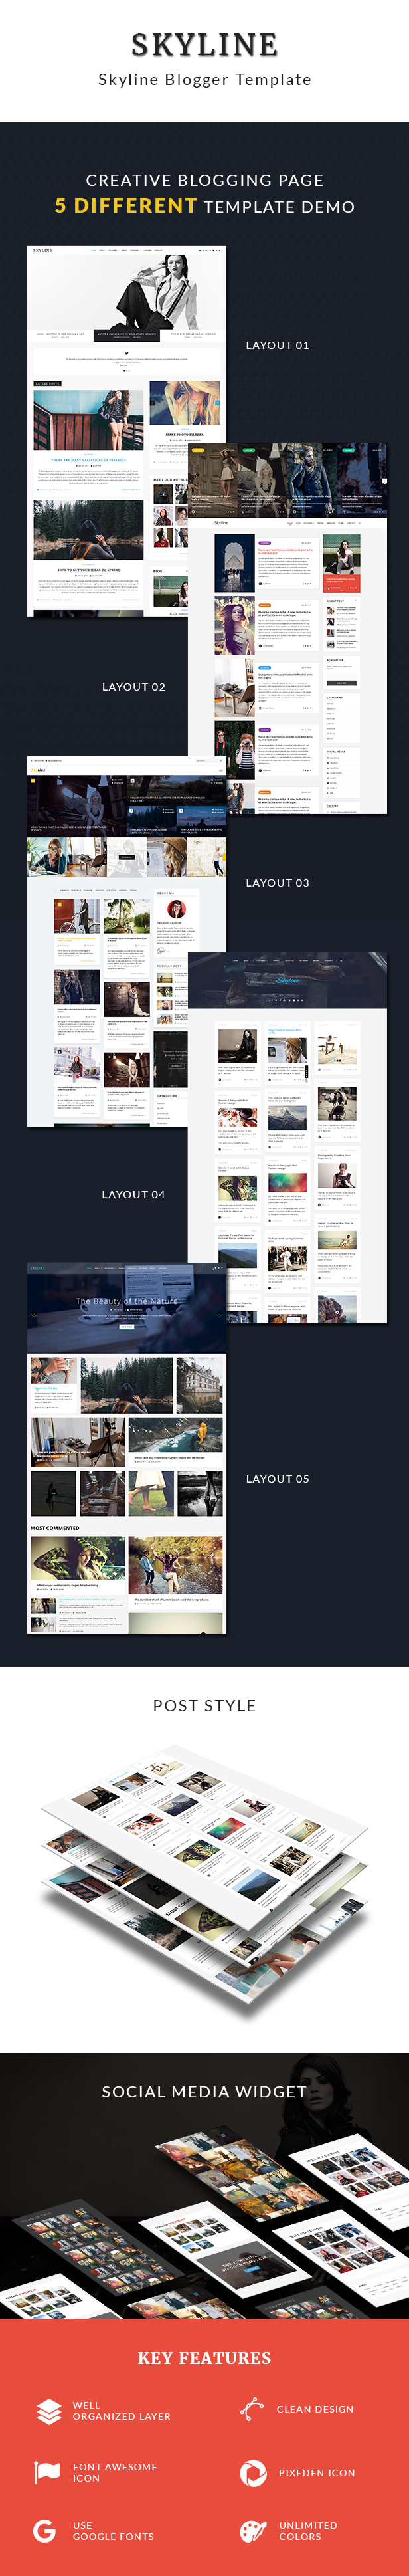 Skyline - PSD template for Bloggers, News and Magazine - 1